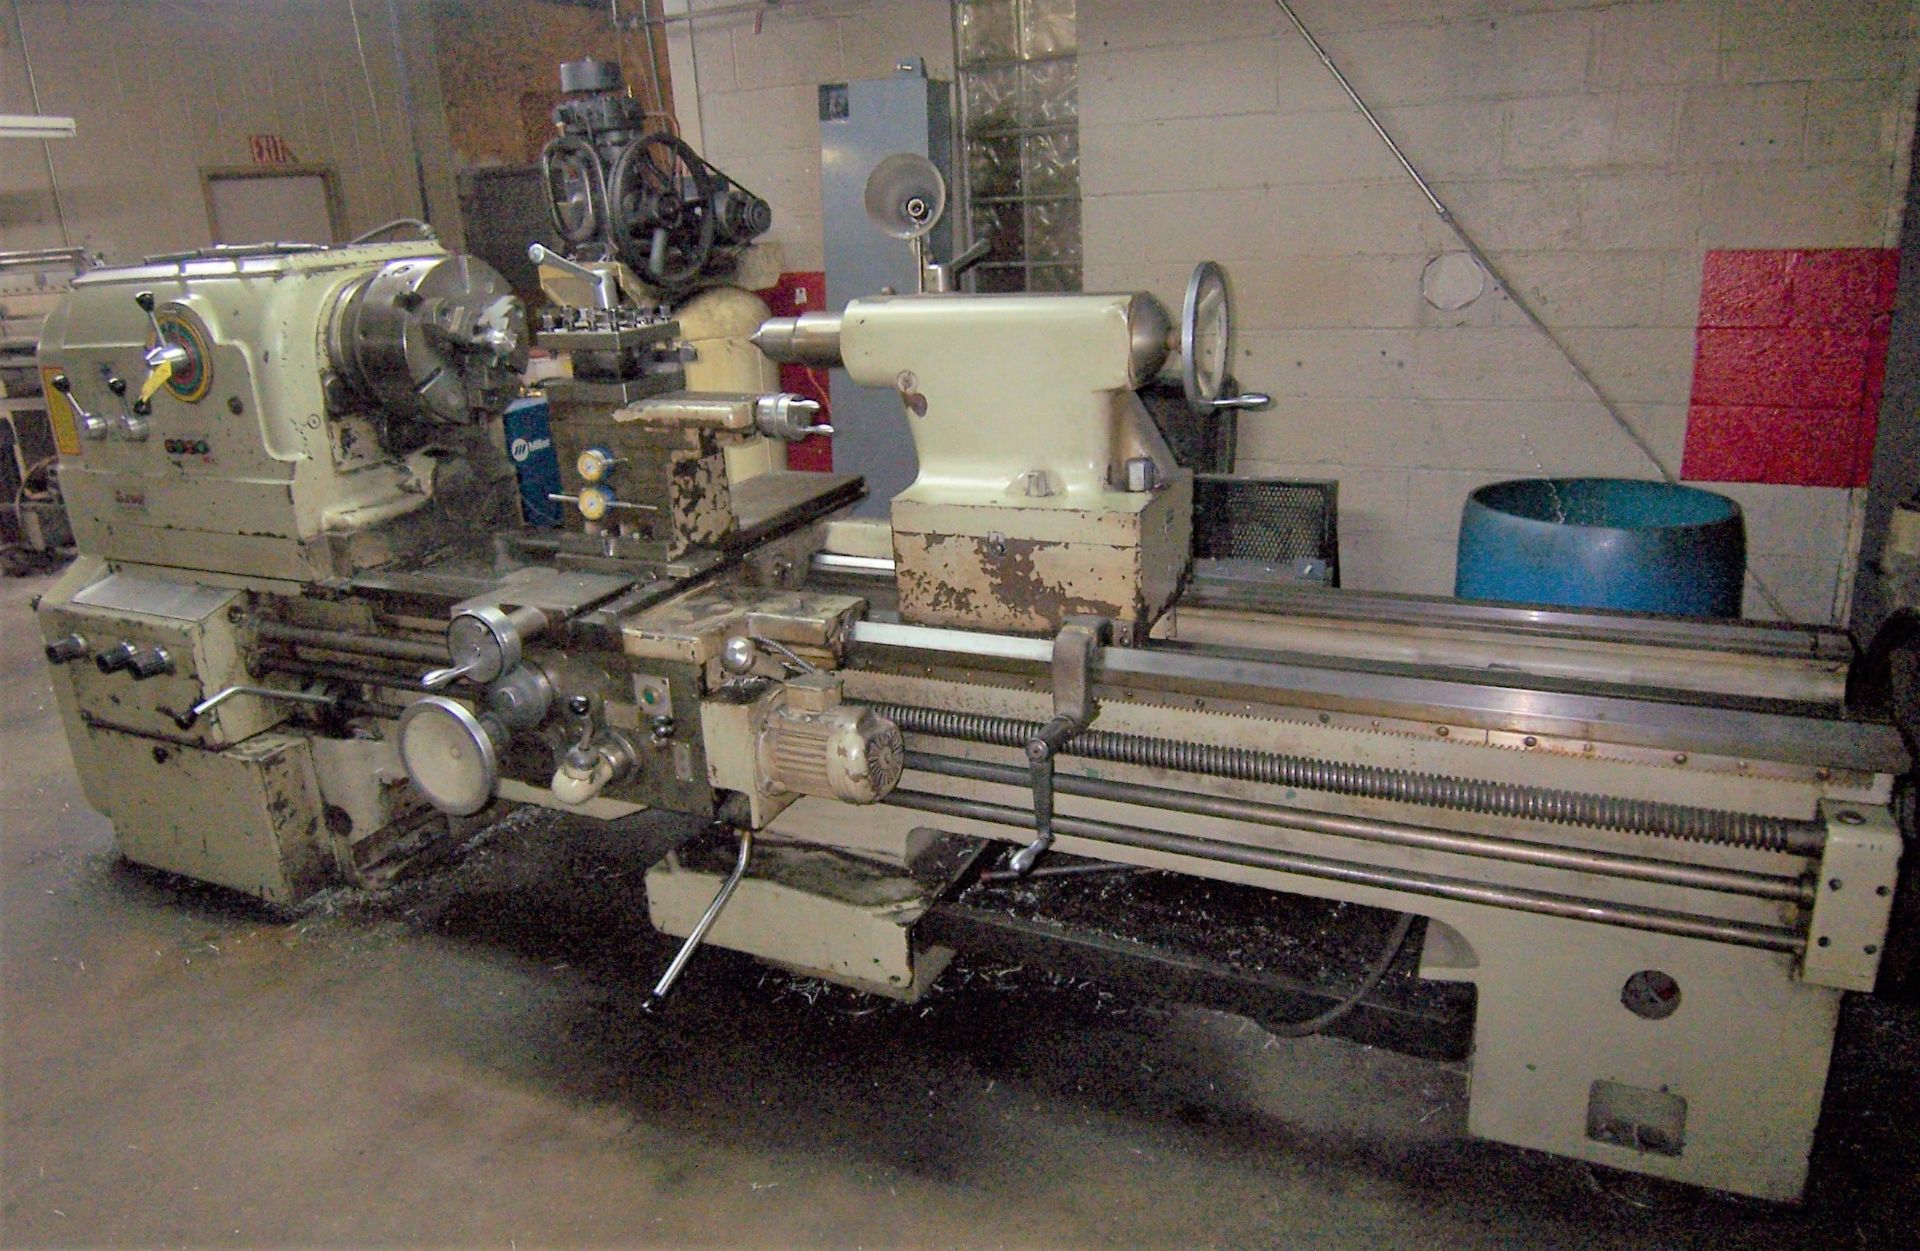 38"/44" X 87" LION GNP BED LATHE WITH 4-1/8" HOLD THRU SPINDLE, SPINDLE SPEEDS 8-1000 RPM, INCH/ - Image 2 of 6